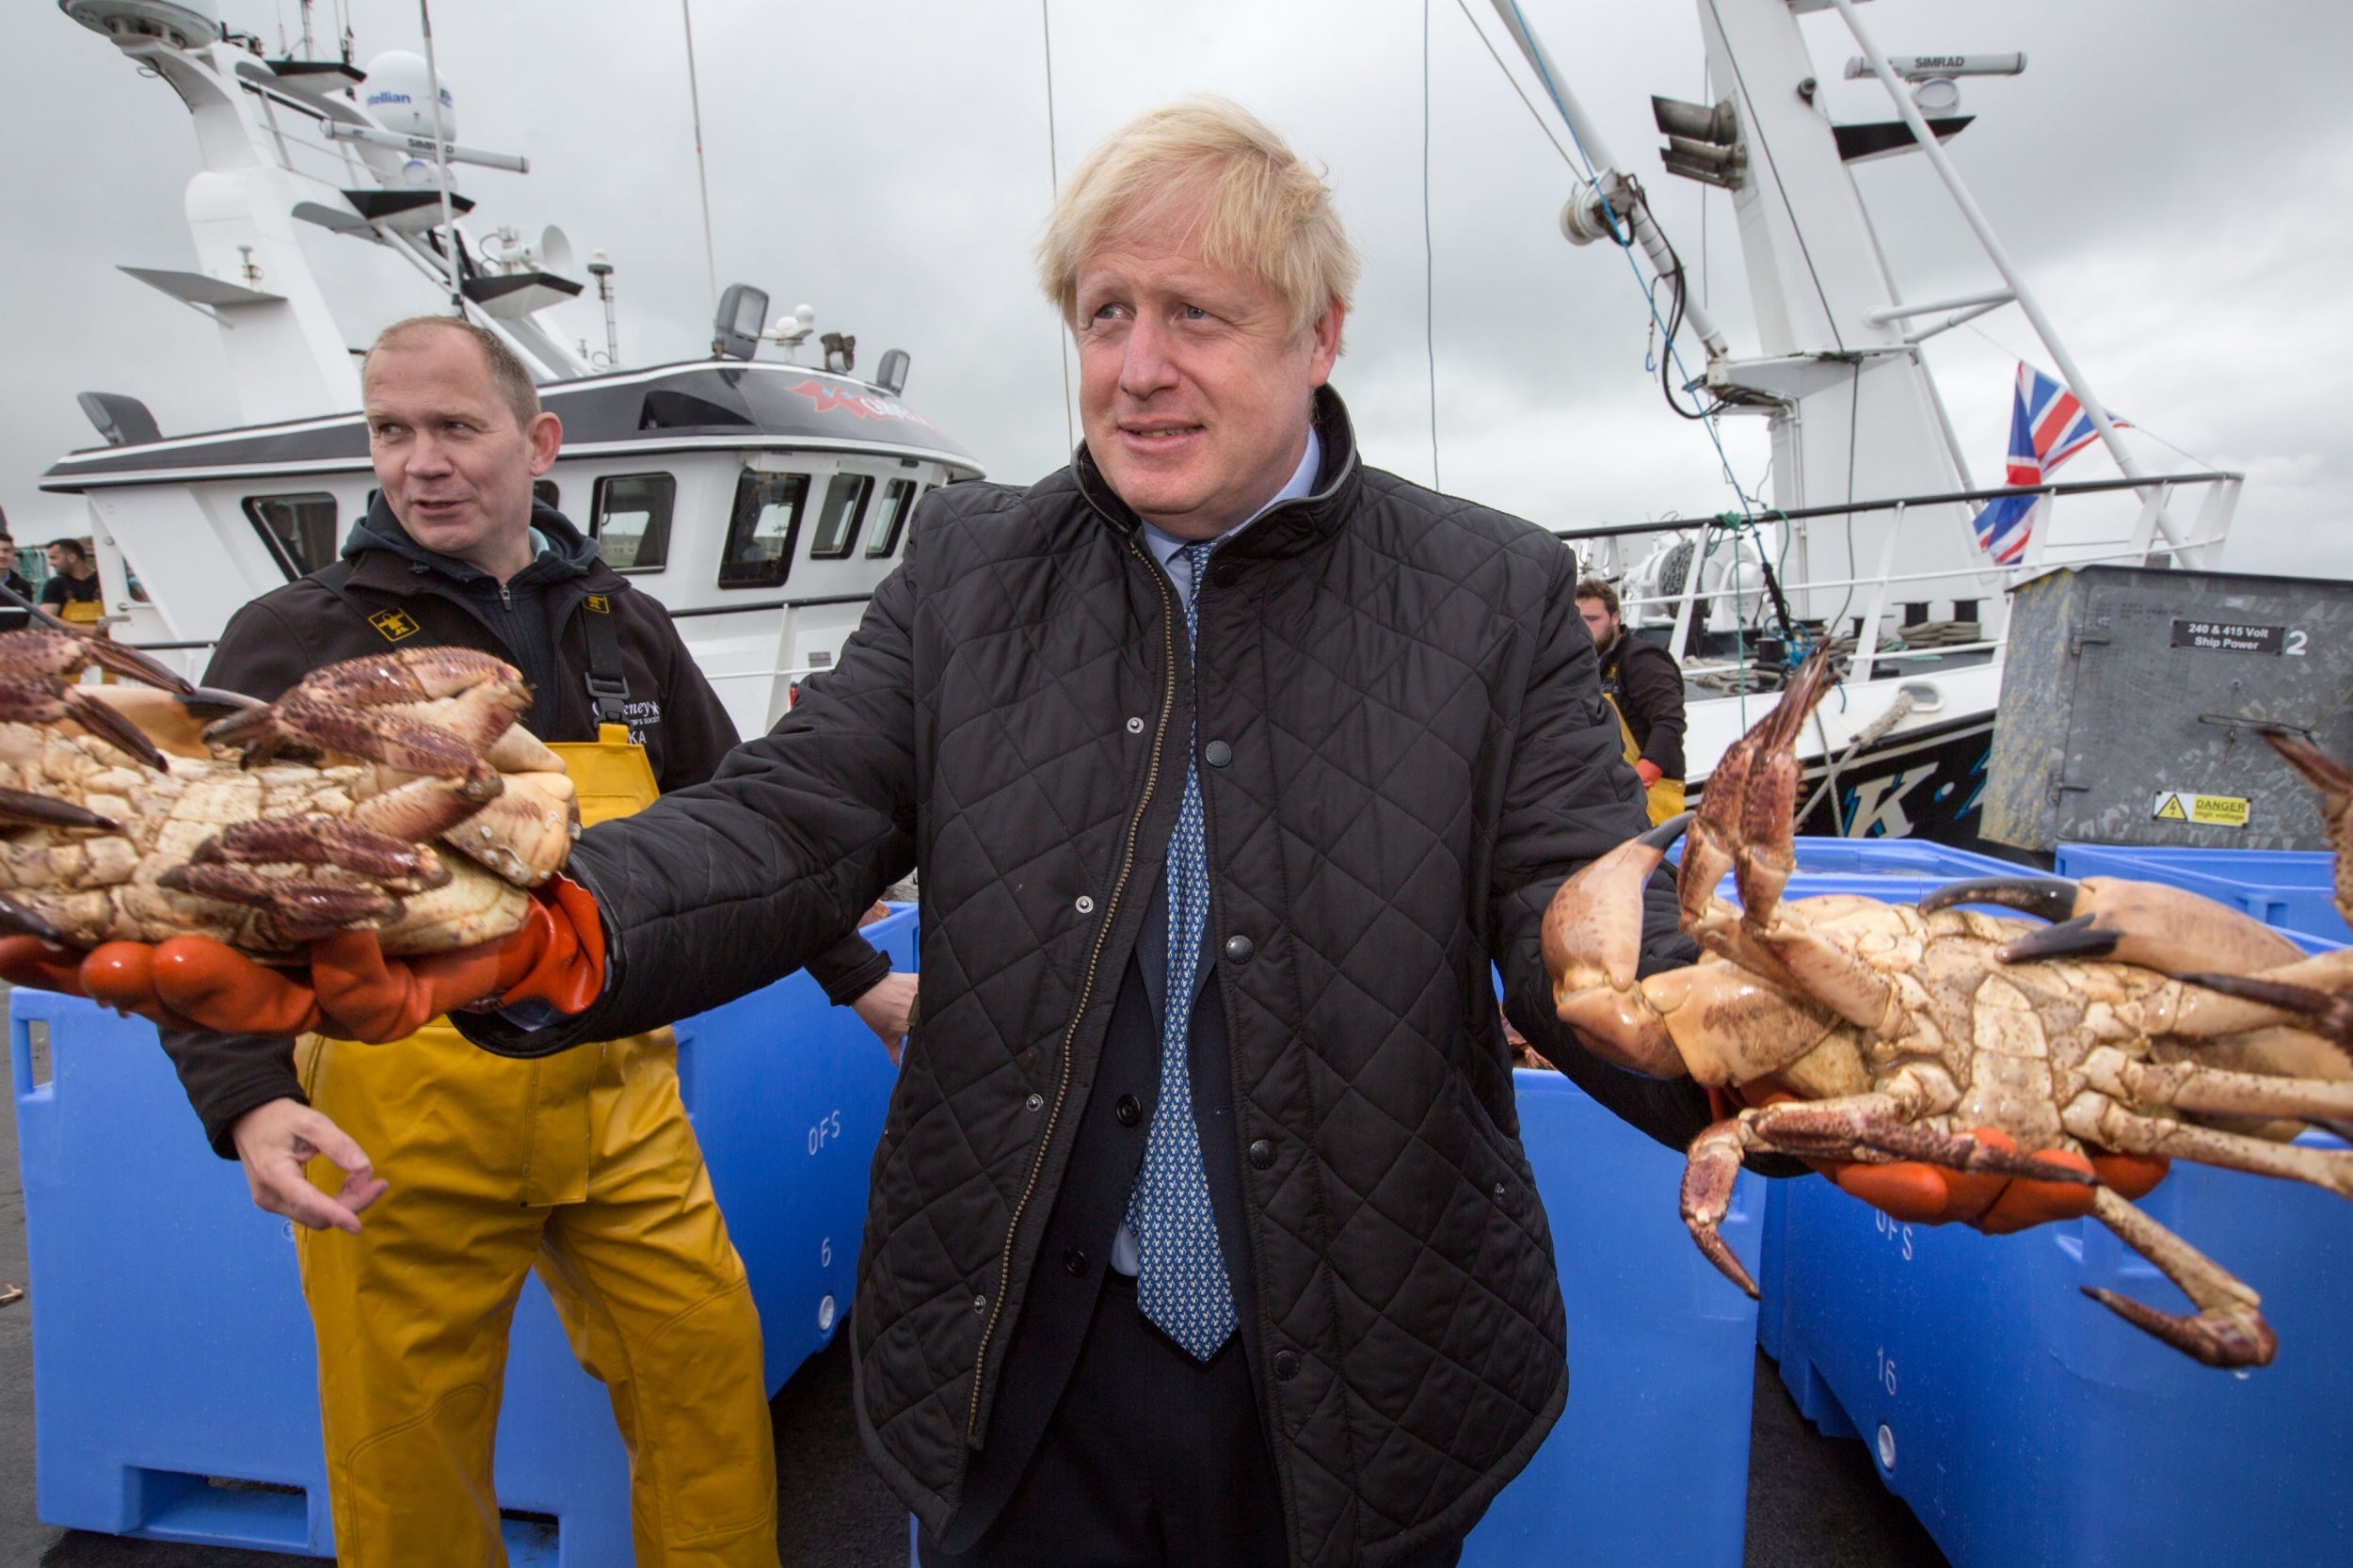 Boris Johnson holds crabs caught on the Carvela at Stromness Harbour during a visit to the Highlands and Northern Isles of Scotland